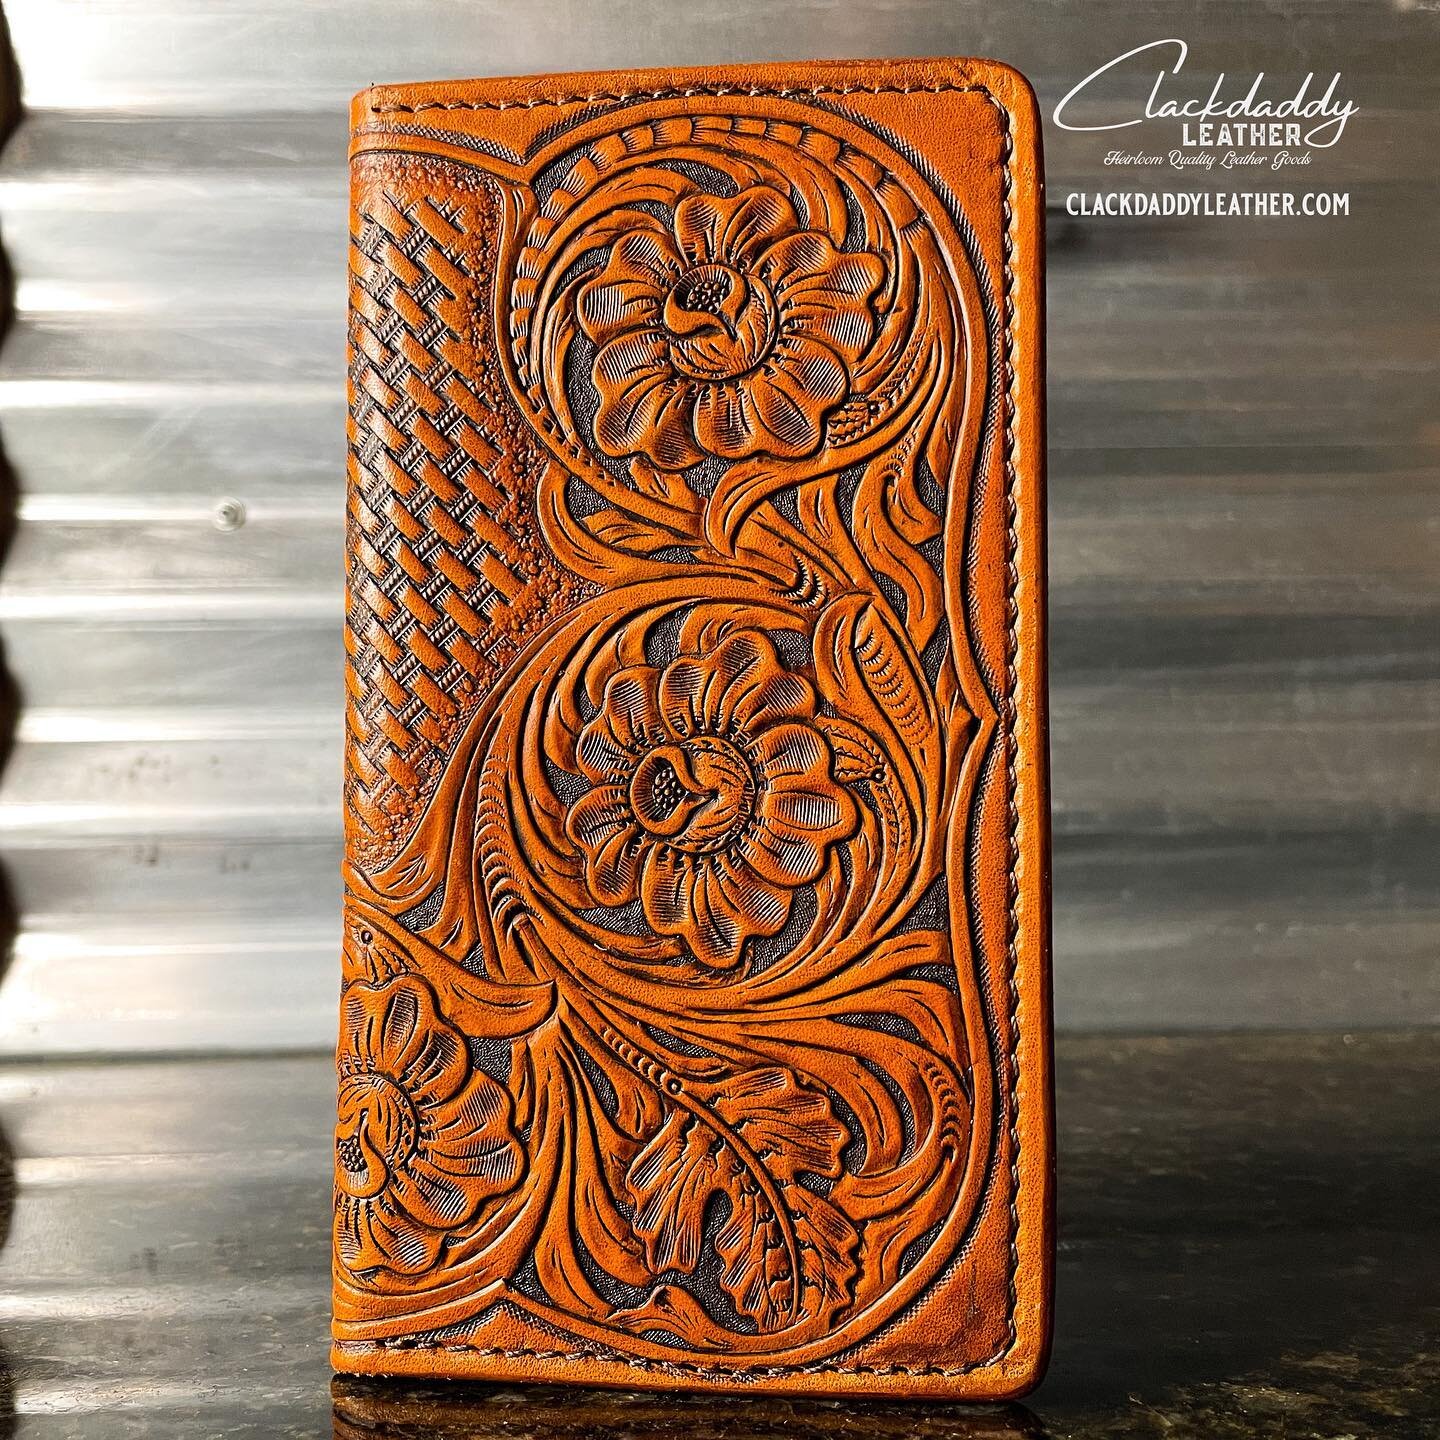 This is one of my favorite ropers from last year. You can snag it on the website or checkout our new Etsy shop. #leathercraft #westernfloral #leathercarving #roperwallet #longwallet #leatherwallet #customwallet #cowboystyle #westernstyle